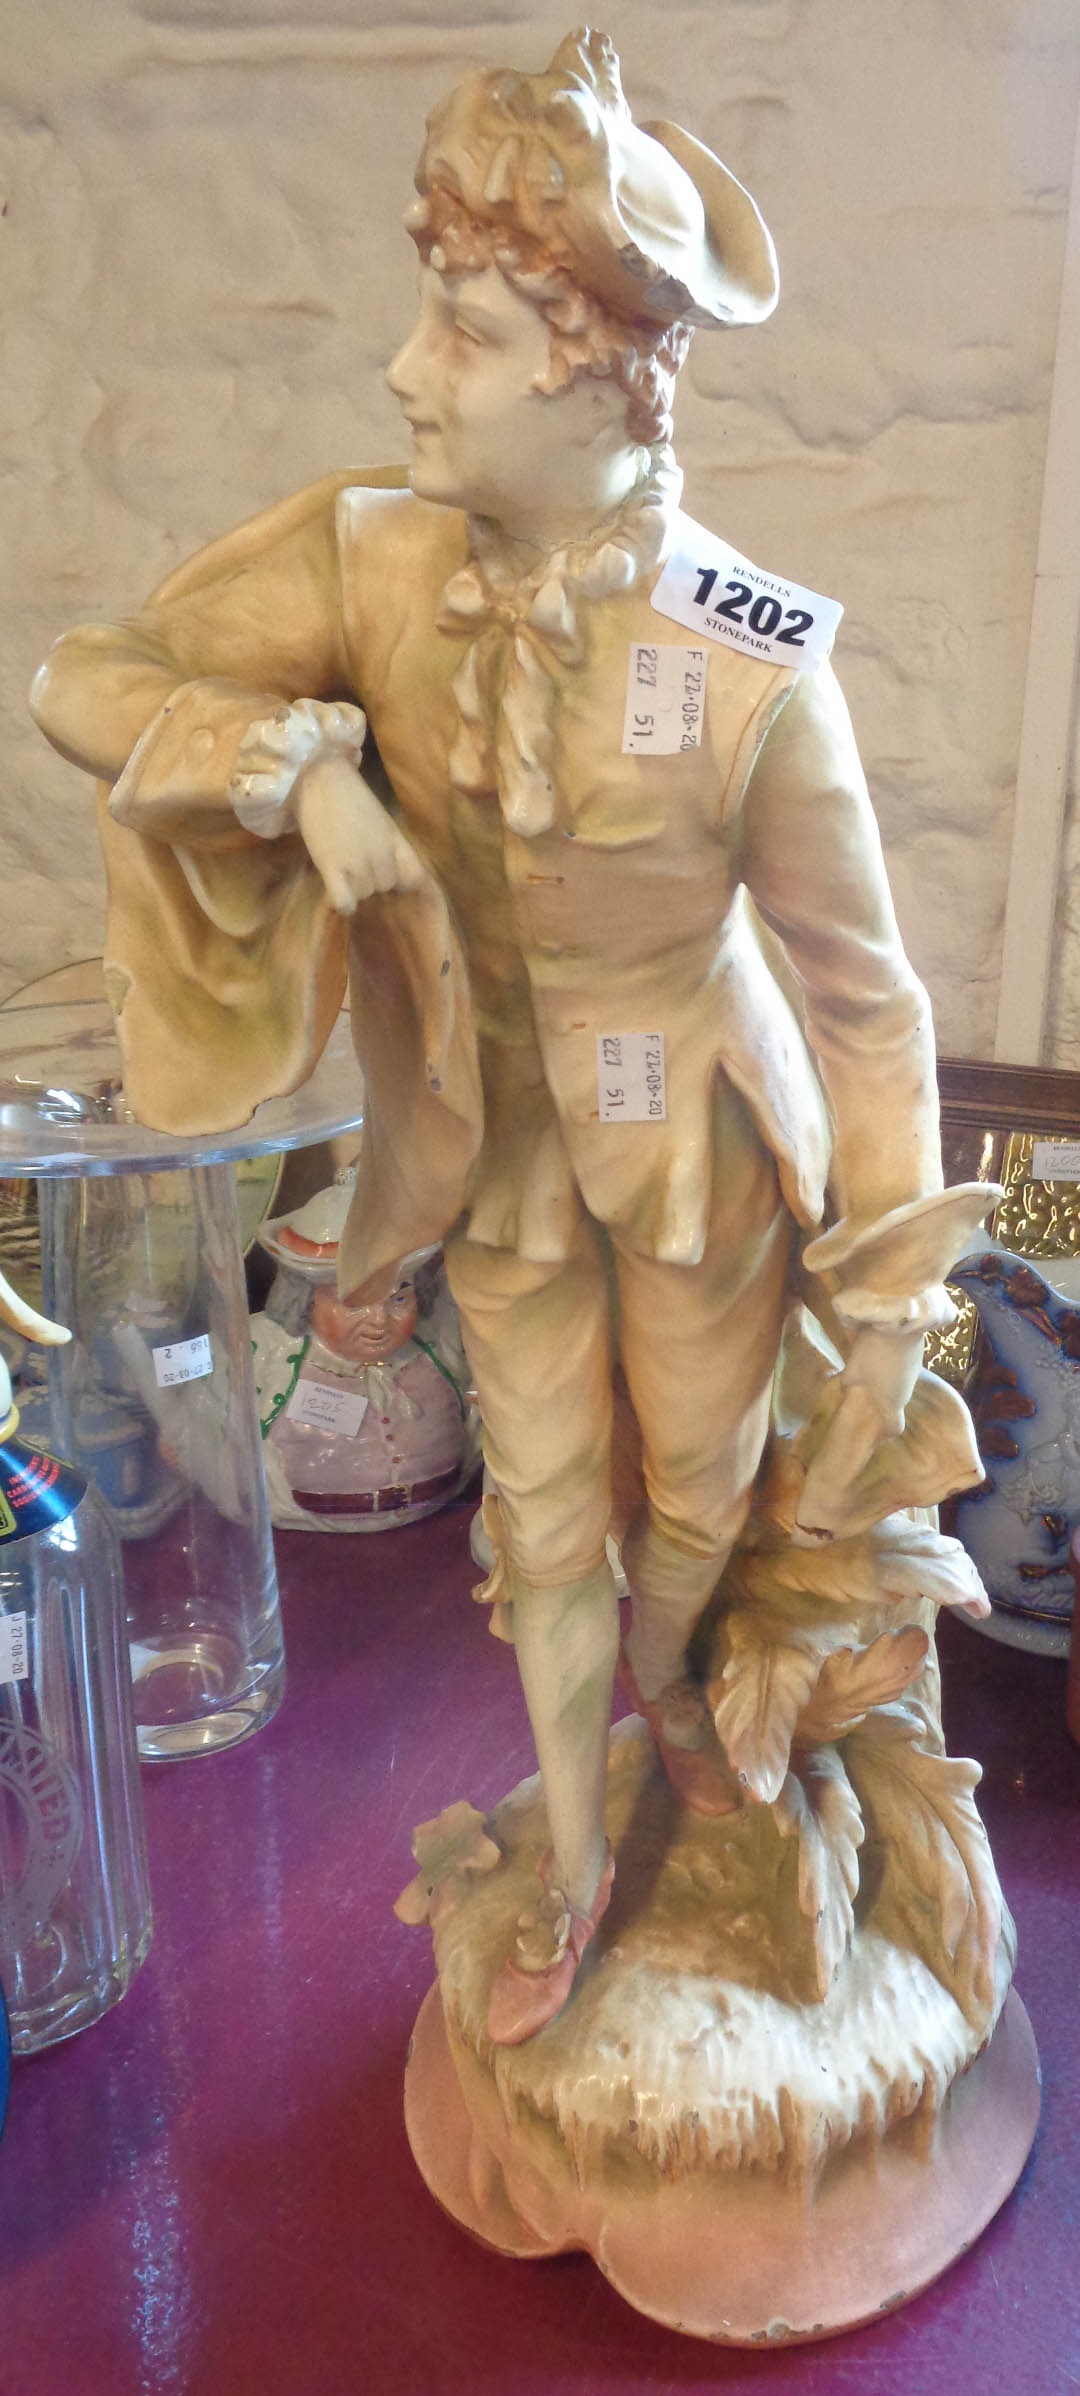 A large continental pottery figurine of a gentleman in period dress - a/f